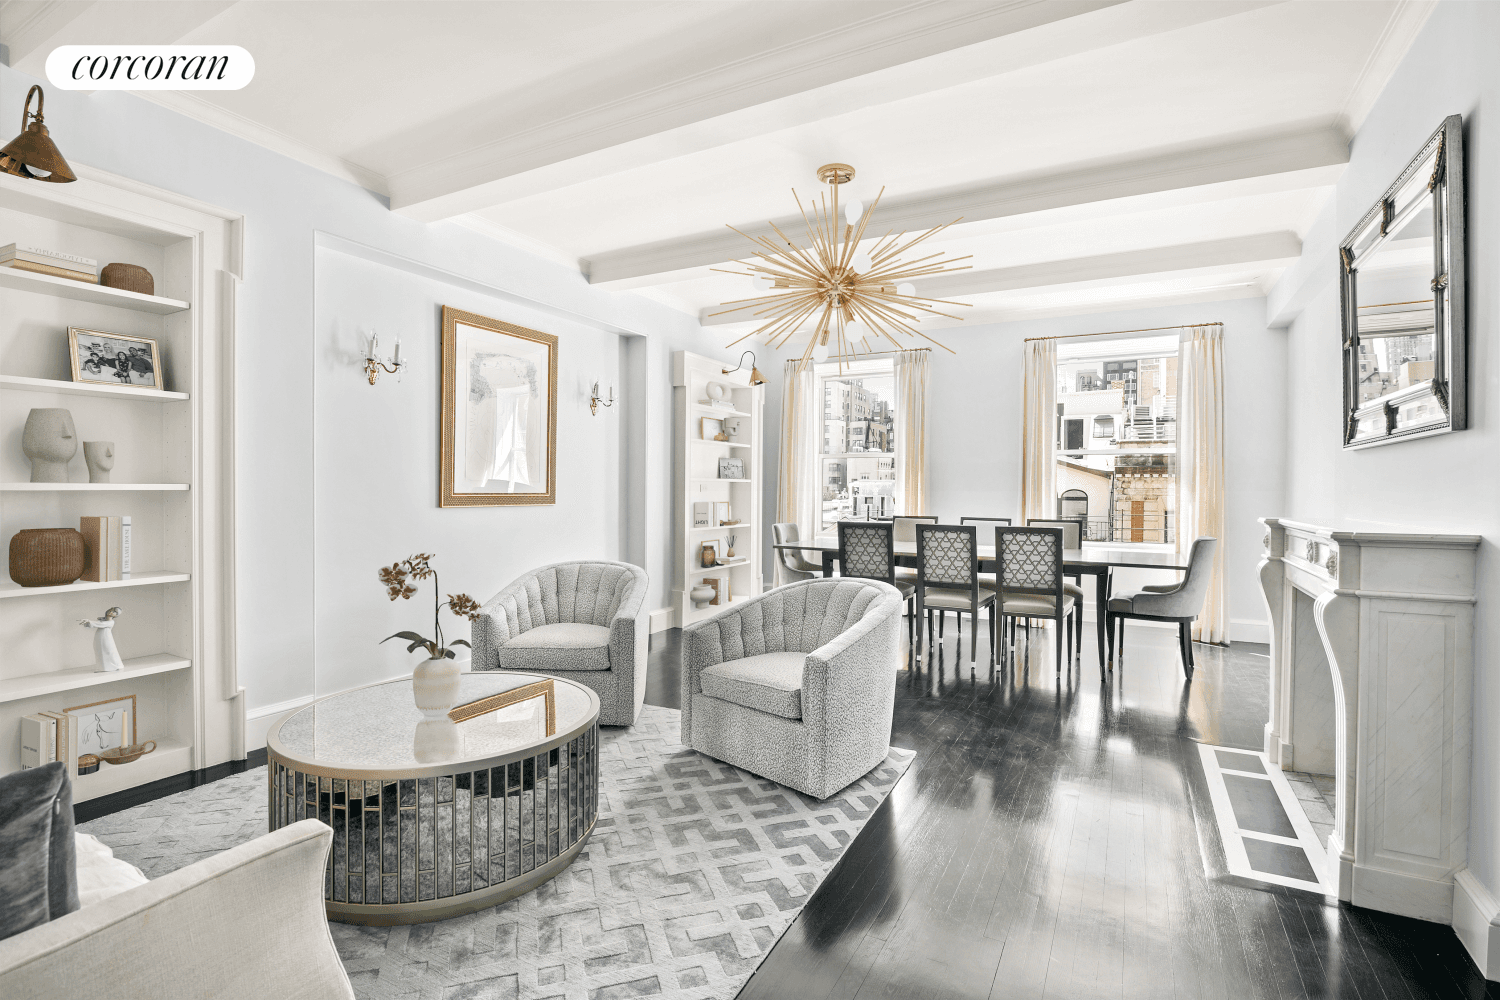 Gorgeous four bedroom home now available for sale in iconic Fifth Avenue location.